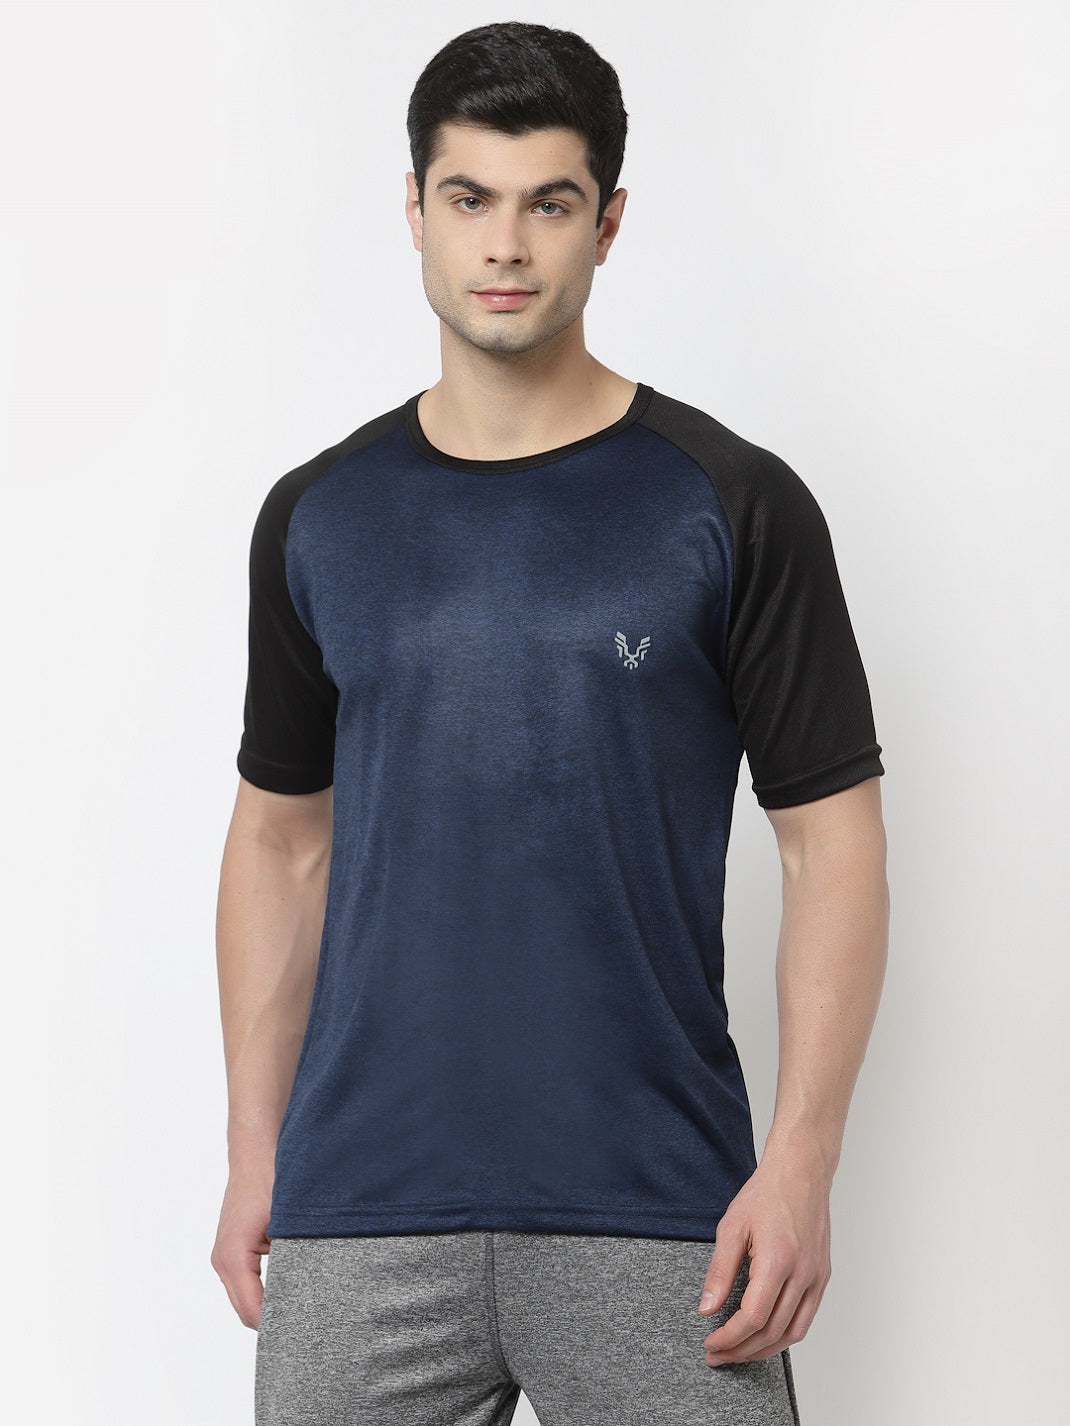 Buy sports t shirt for men online in india